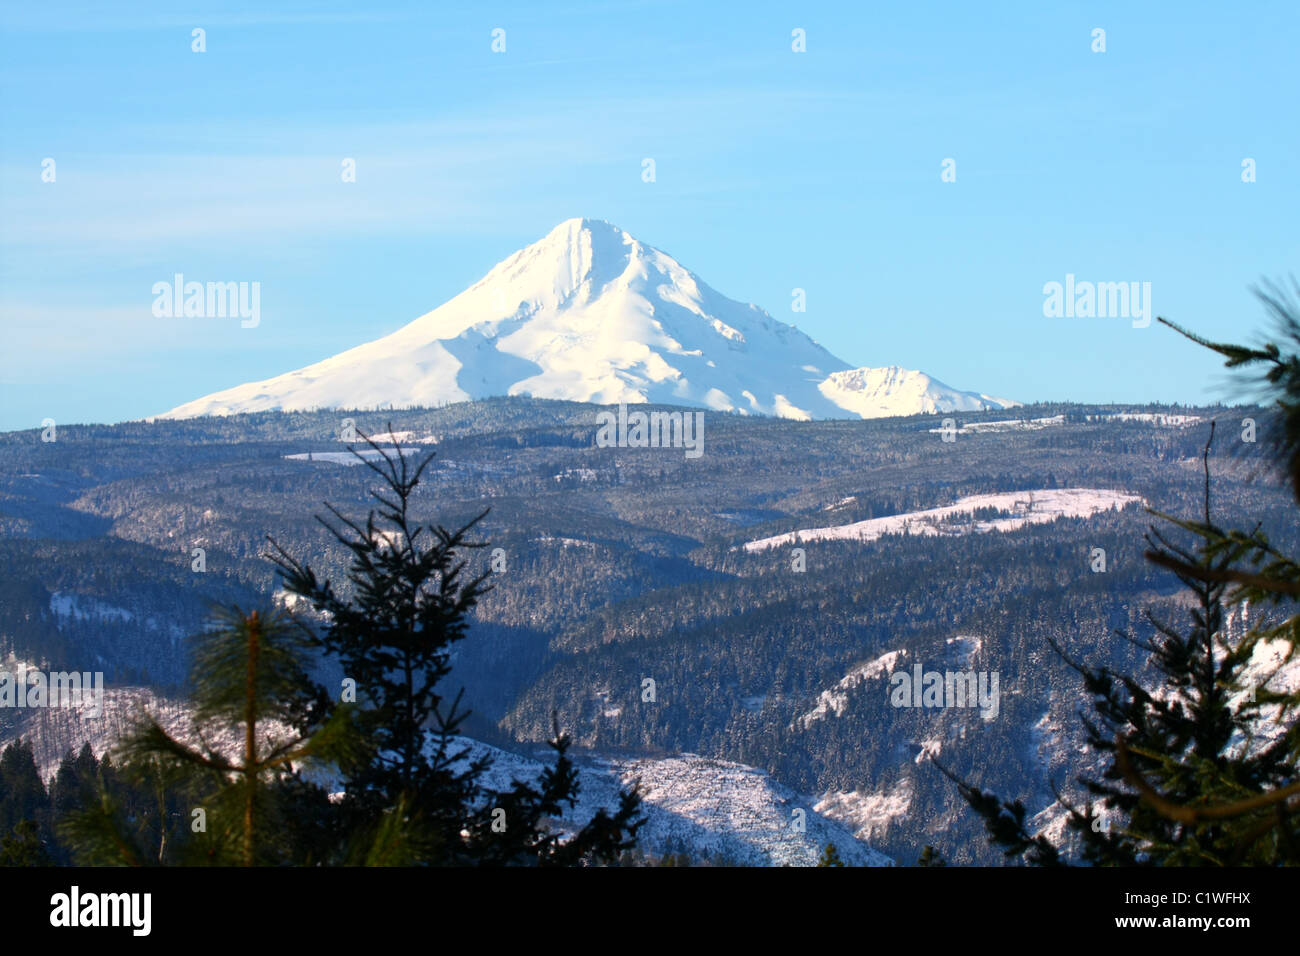 40,600.03124 A distant snow-covered mountain -- Mt Hood (11,240 ft tall) -- soaring over a tree covered ridge top, against a soft blue sky. Stock Photo